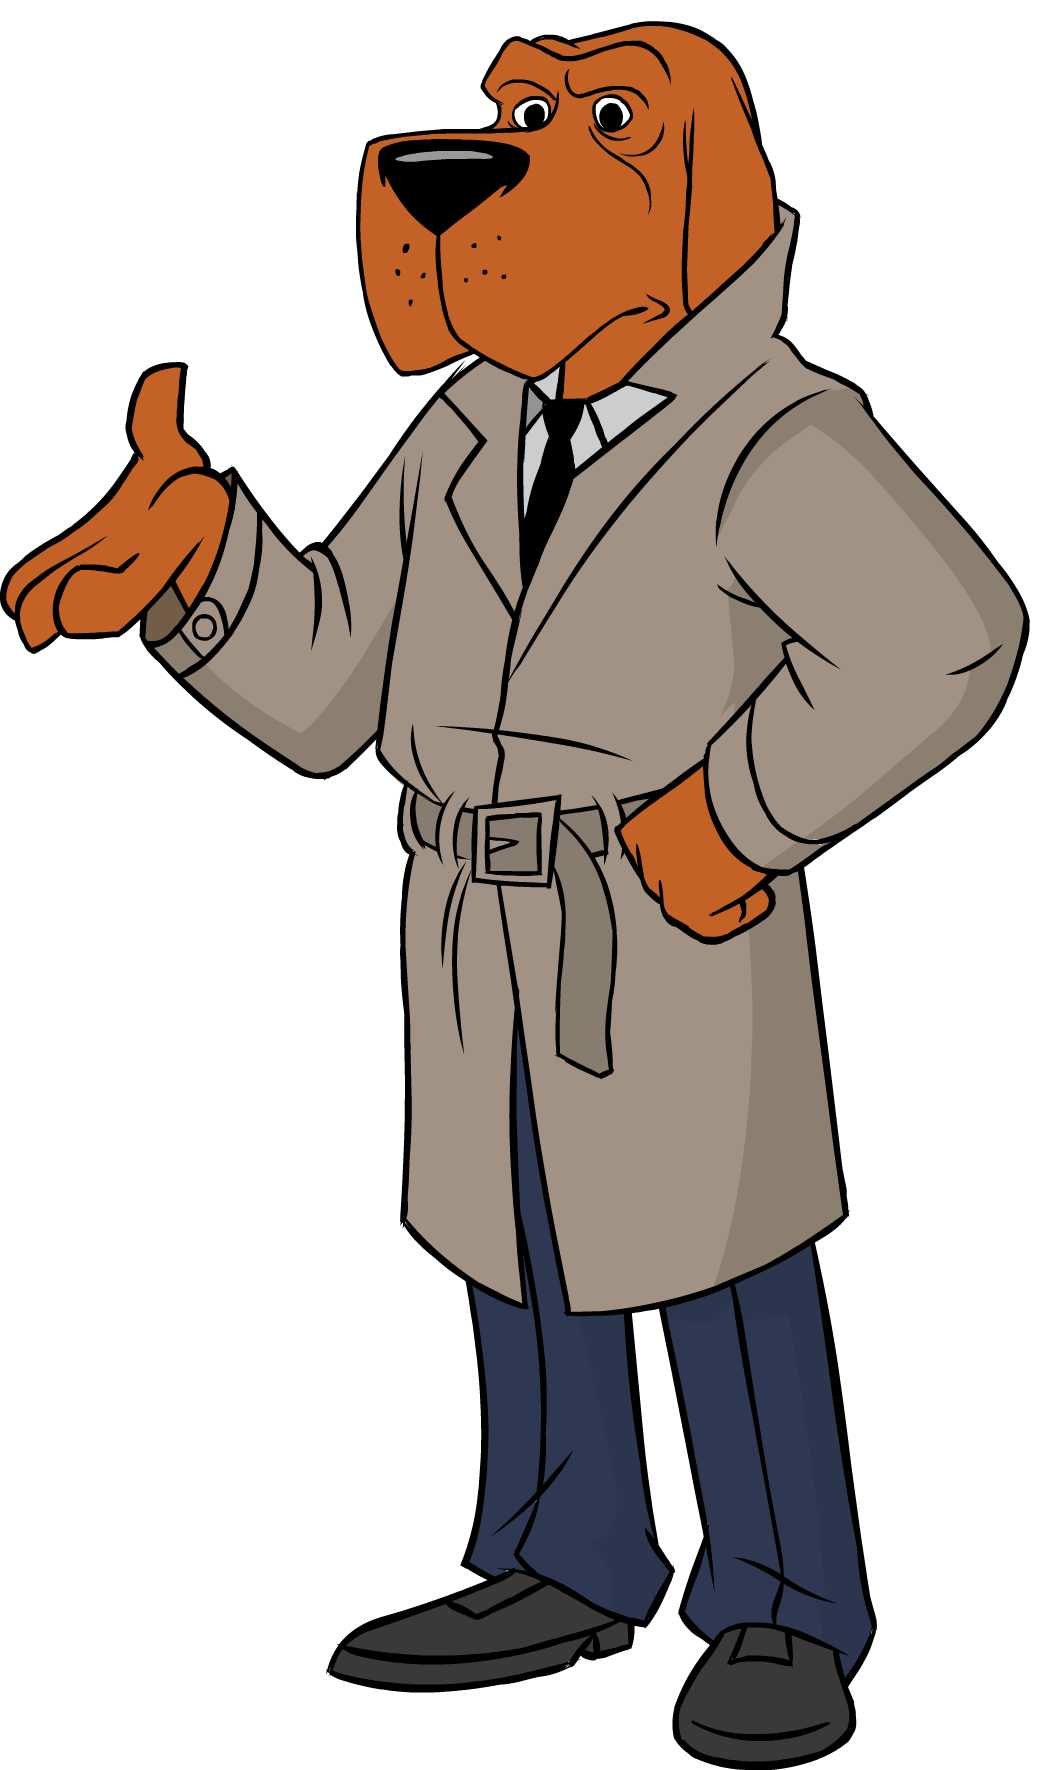 McGruff the Crime Dog | Made up Characters Wiki | FANDOM powered by Wikia